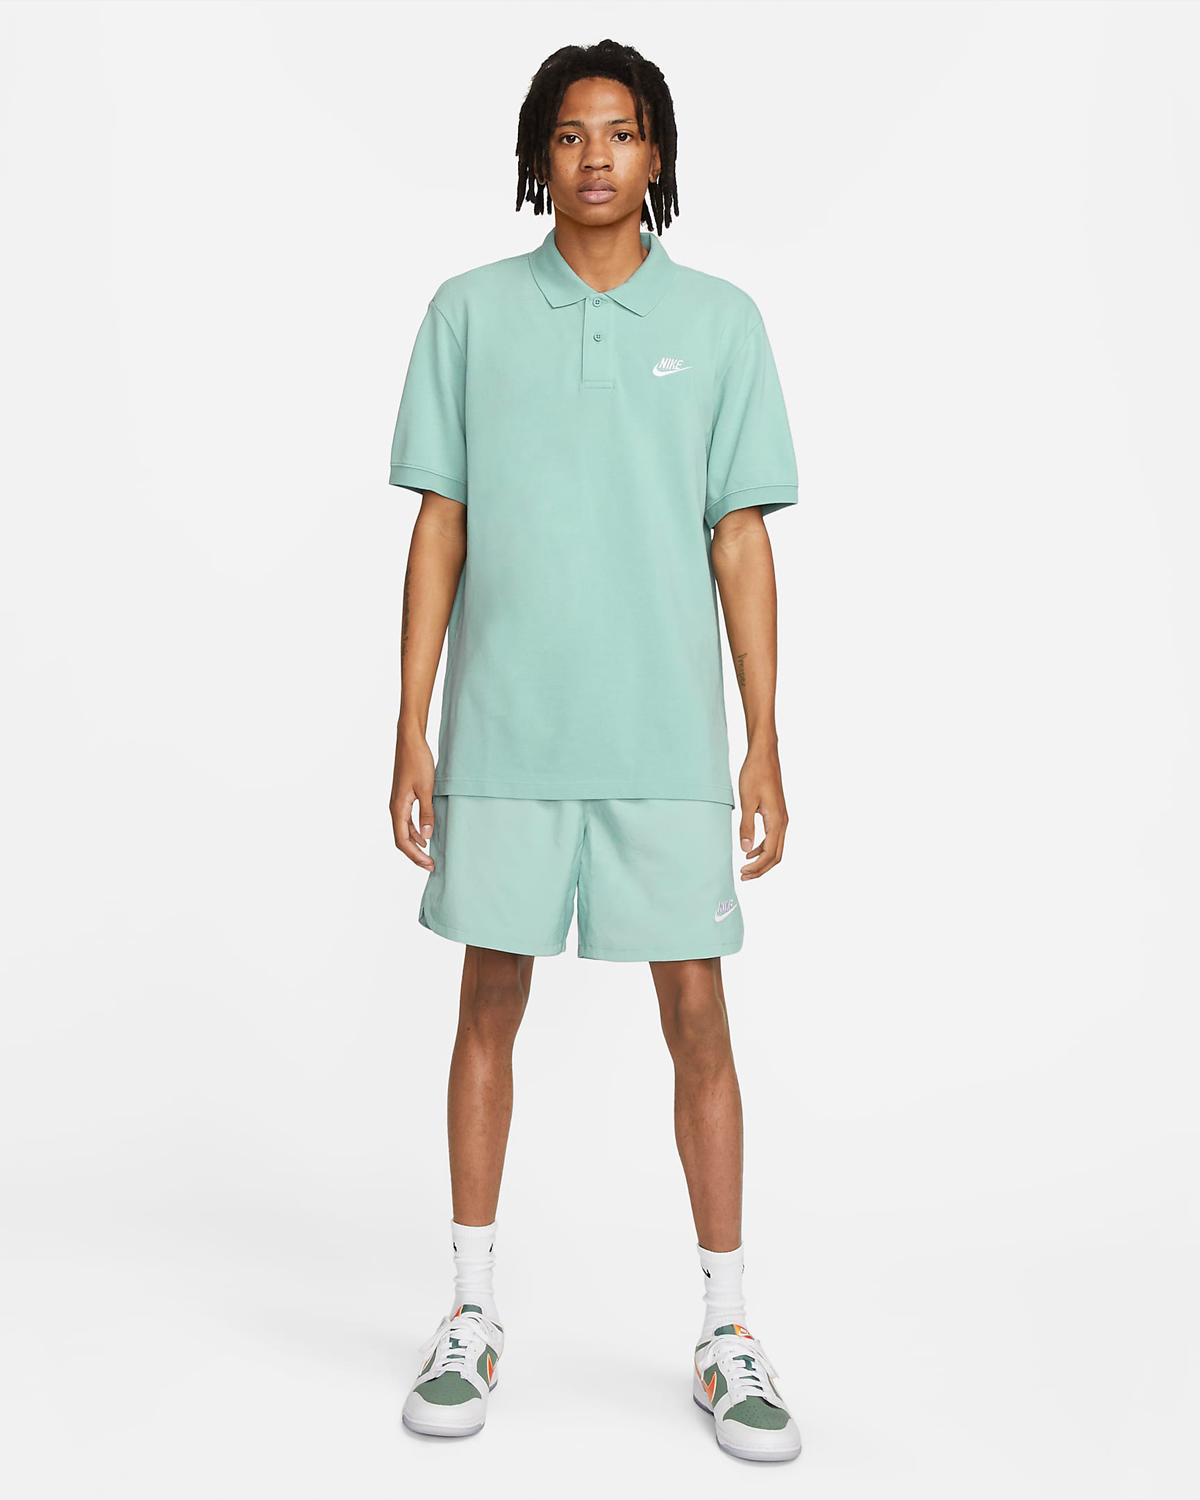 Nike-Sportswear-Polo-Shirt-Mineral-Outfit